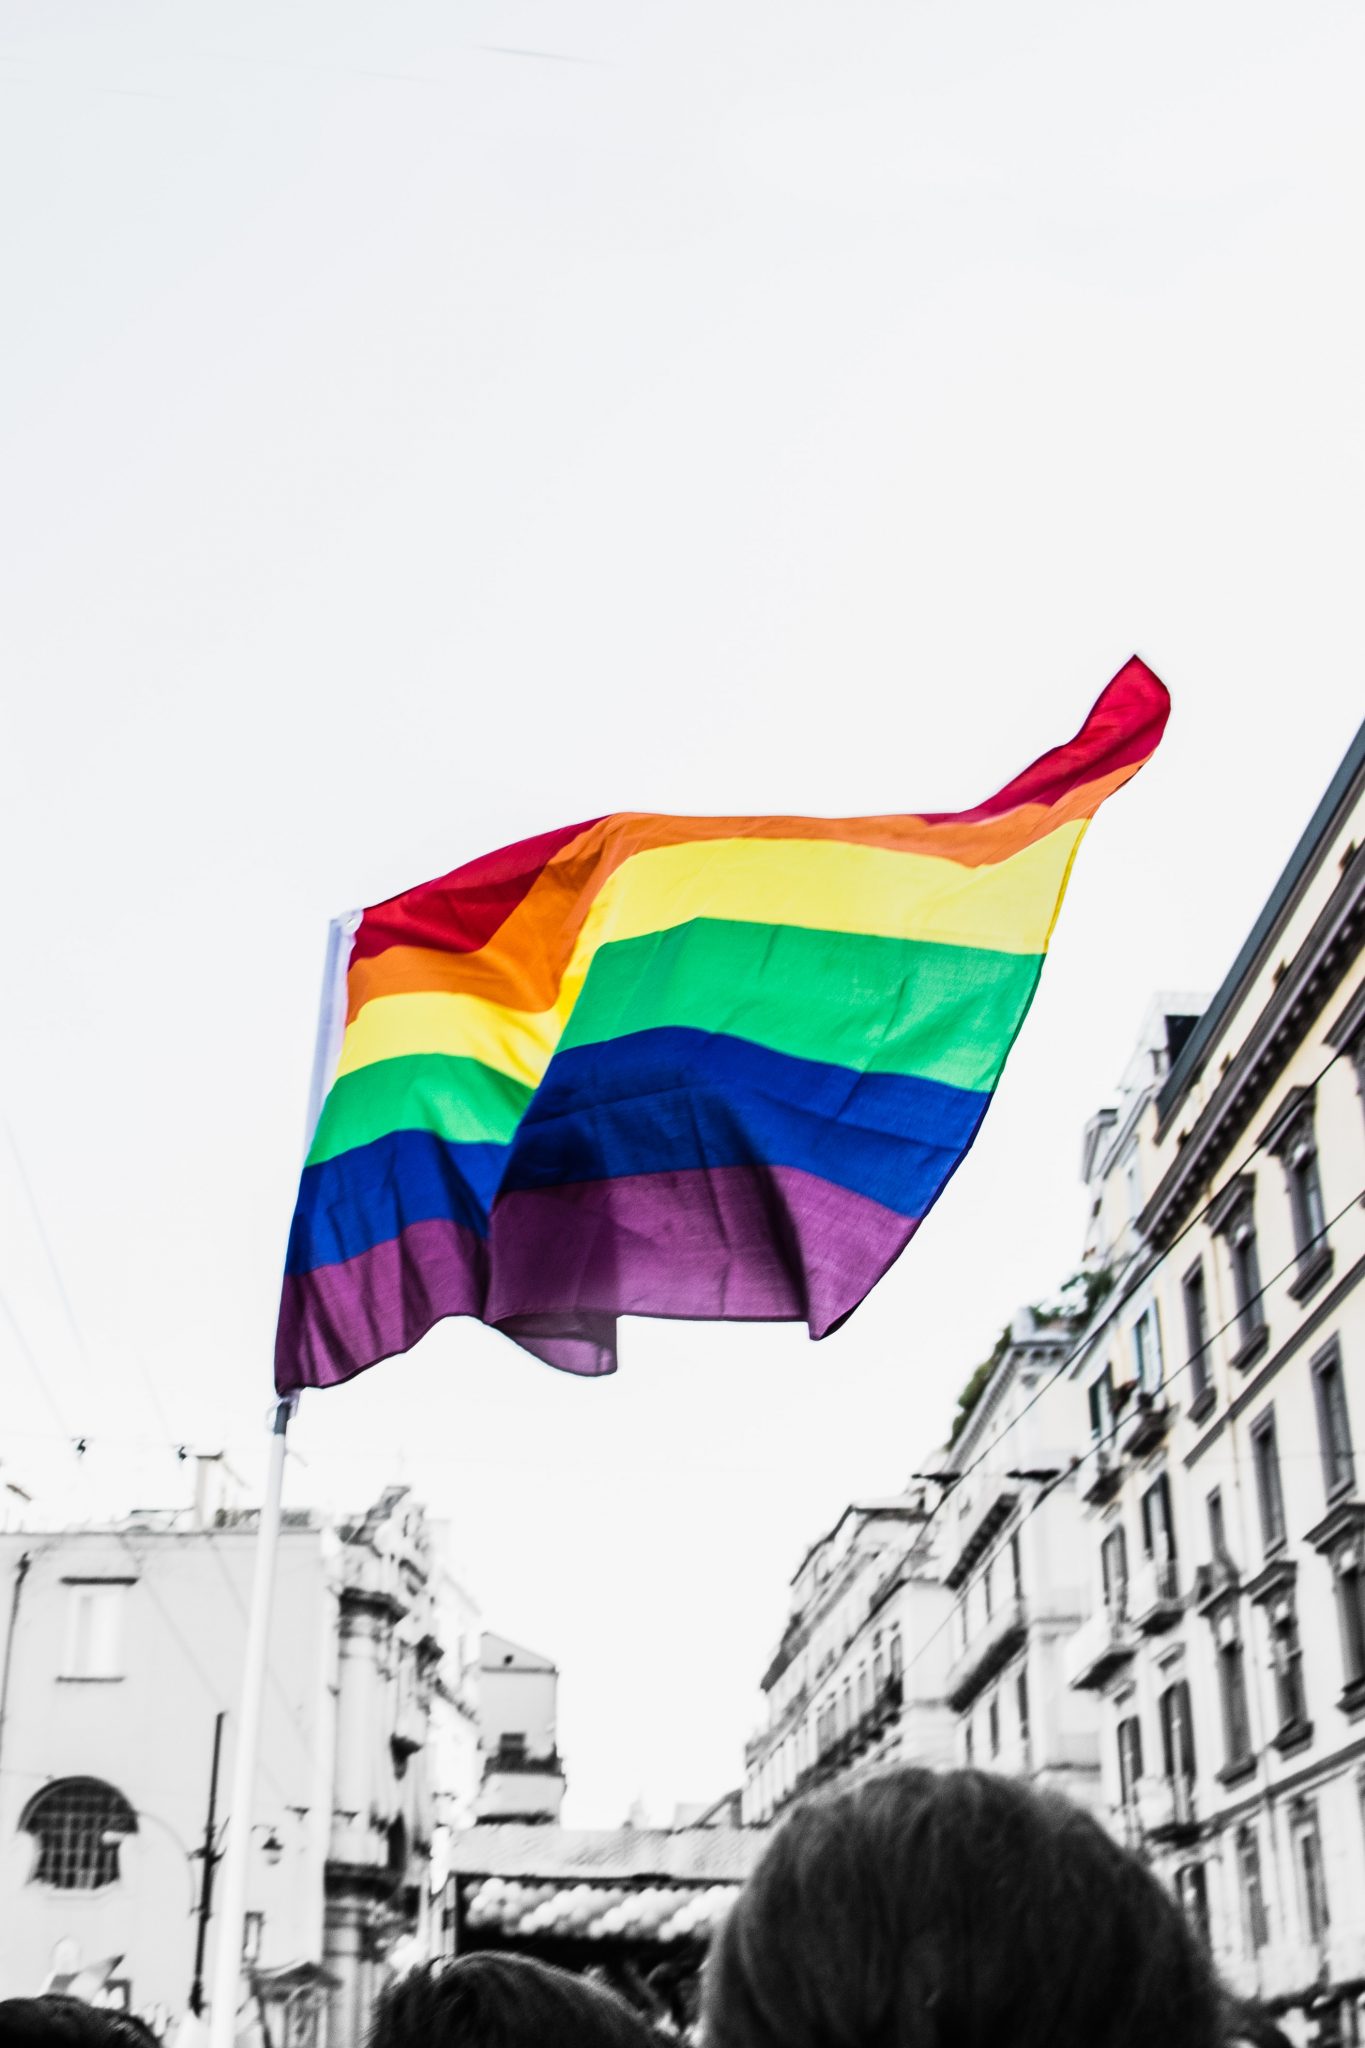 How to find LGBTQ+ pen pals